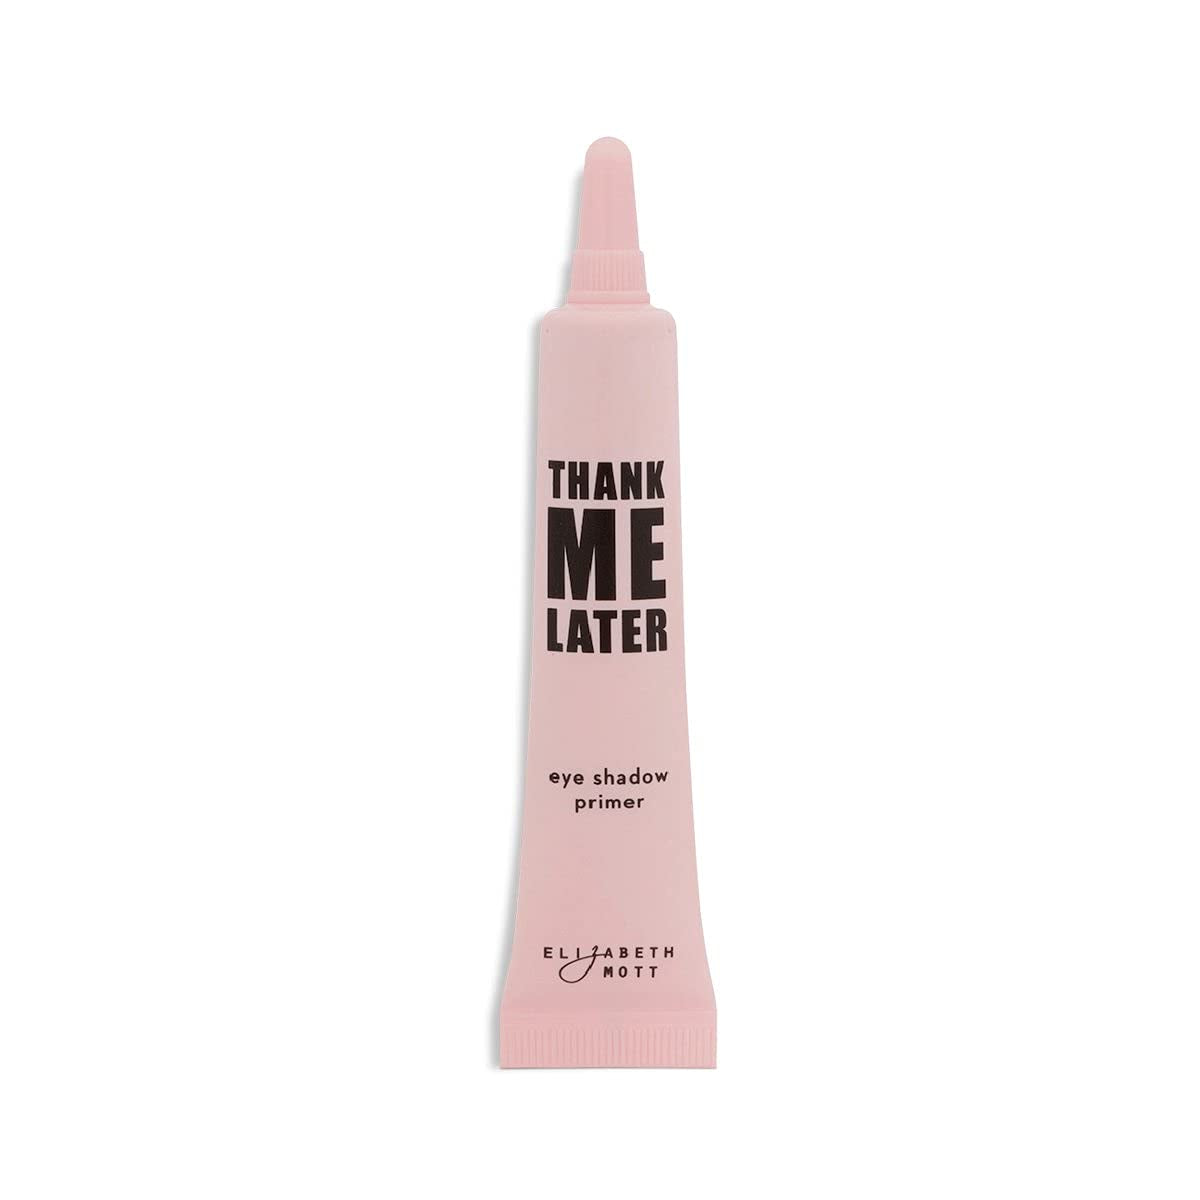 Thank Me Later Eye and Face Matte Primer for Long-Lasting Power Grip Makeup, Shine & Oil Control, Pore Minimizer, Hides Wrinkles & Fine Lines, Prevent Creasing for All-Day Eye Makeup Wear-10G & 30G